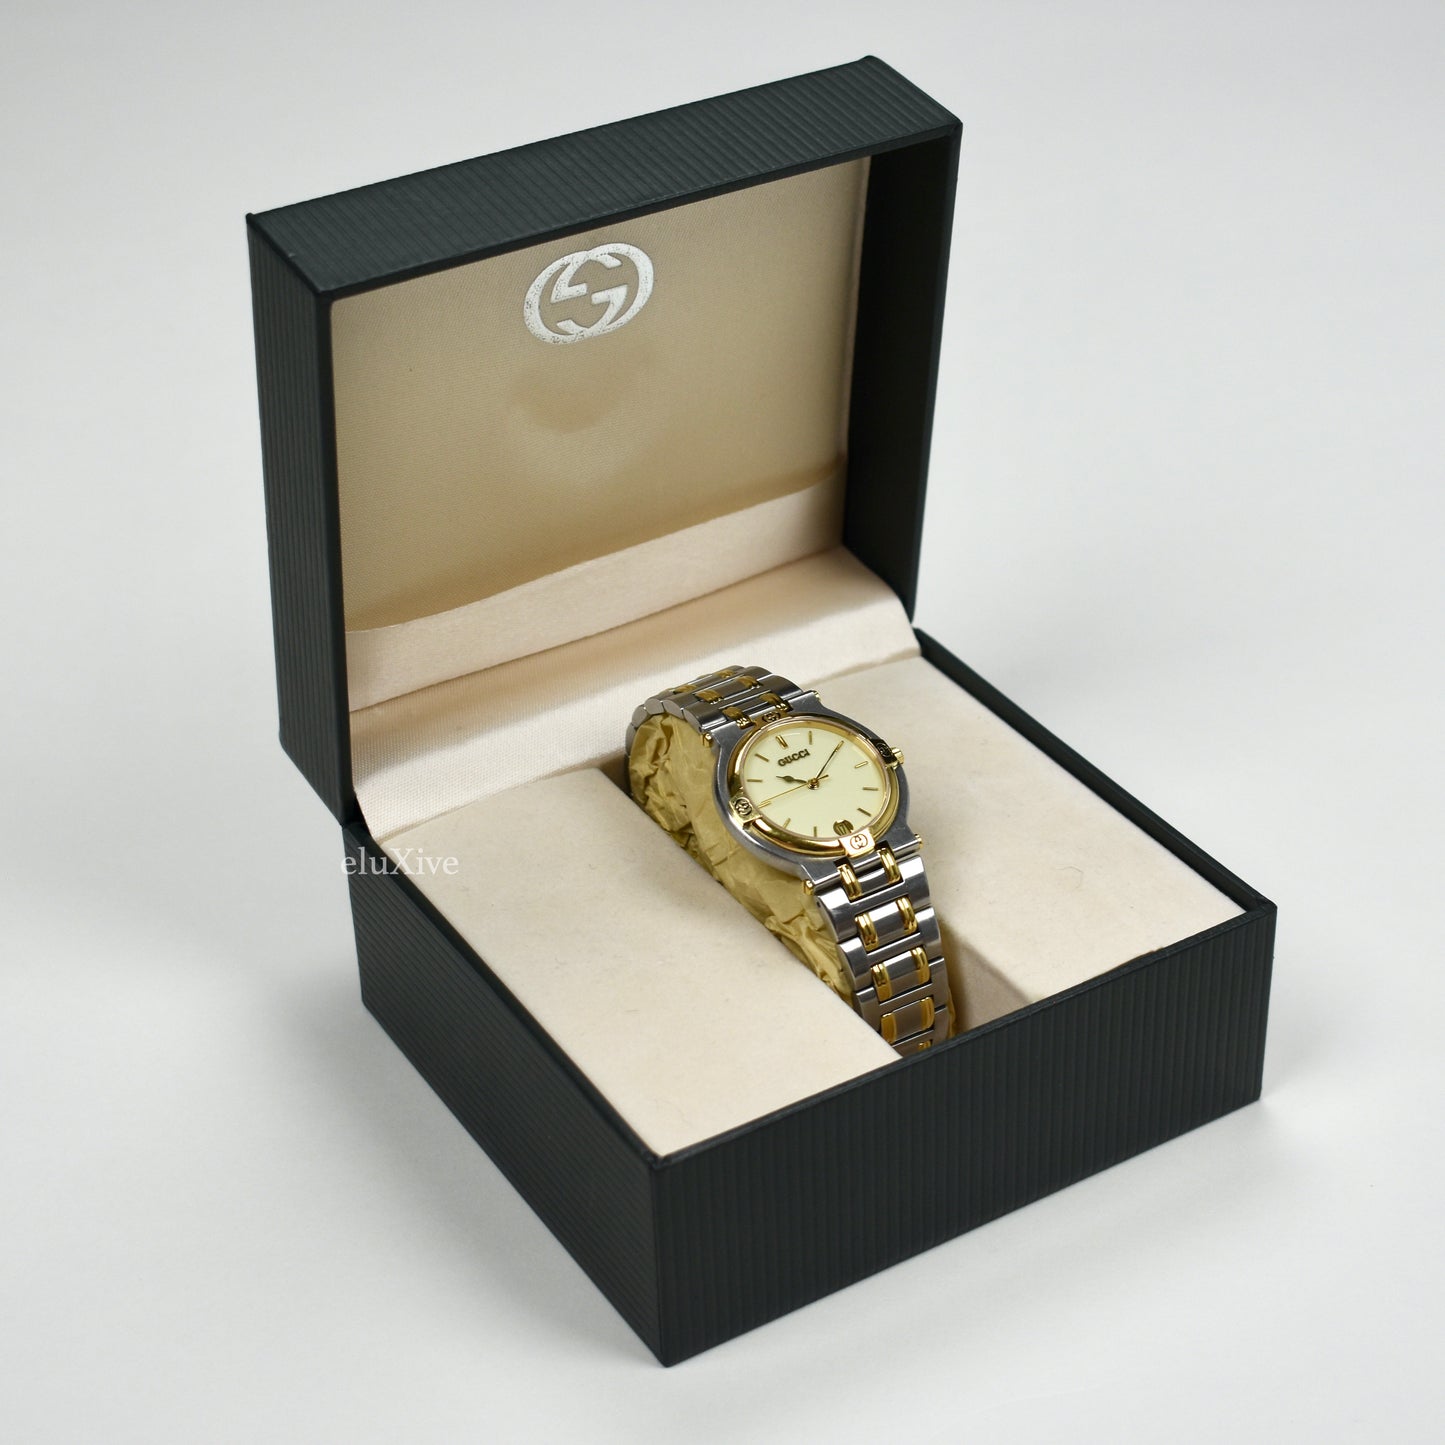 Gucci - 9000M Gold / Steel Cream Dial Watch (Solid Links)